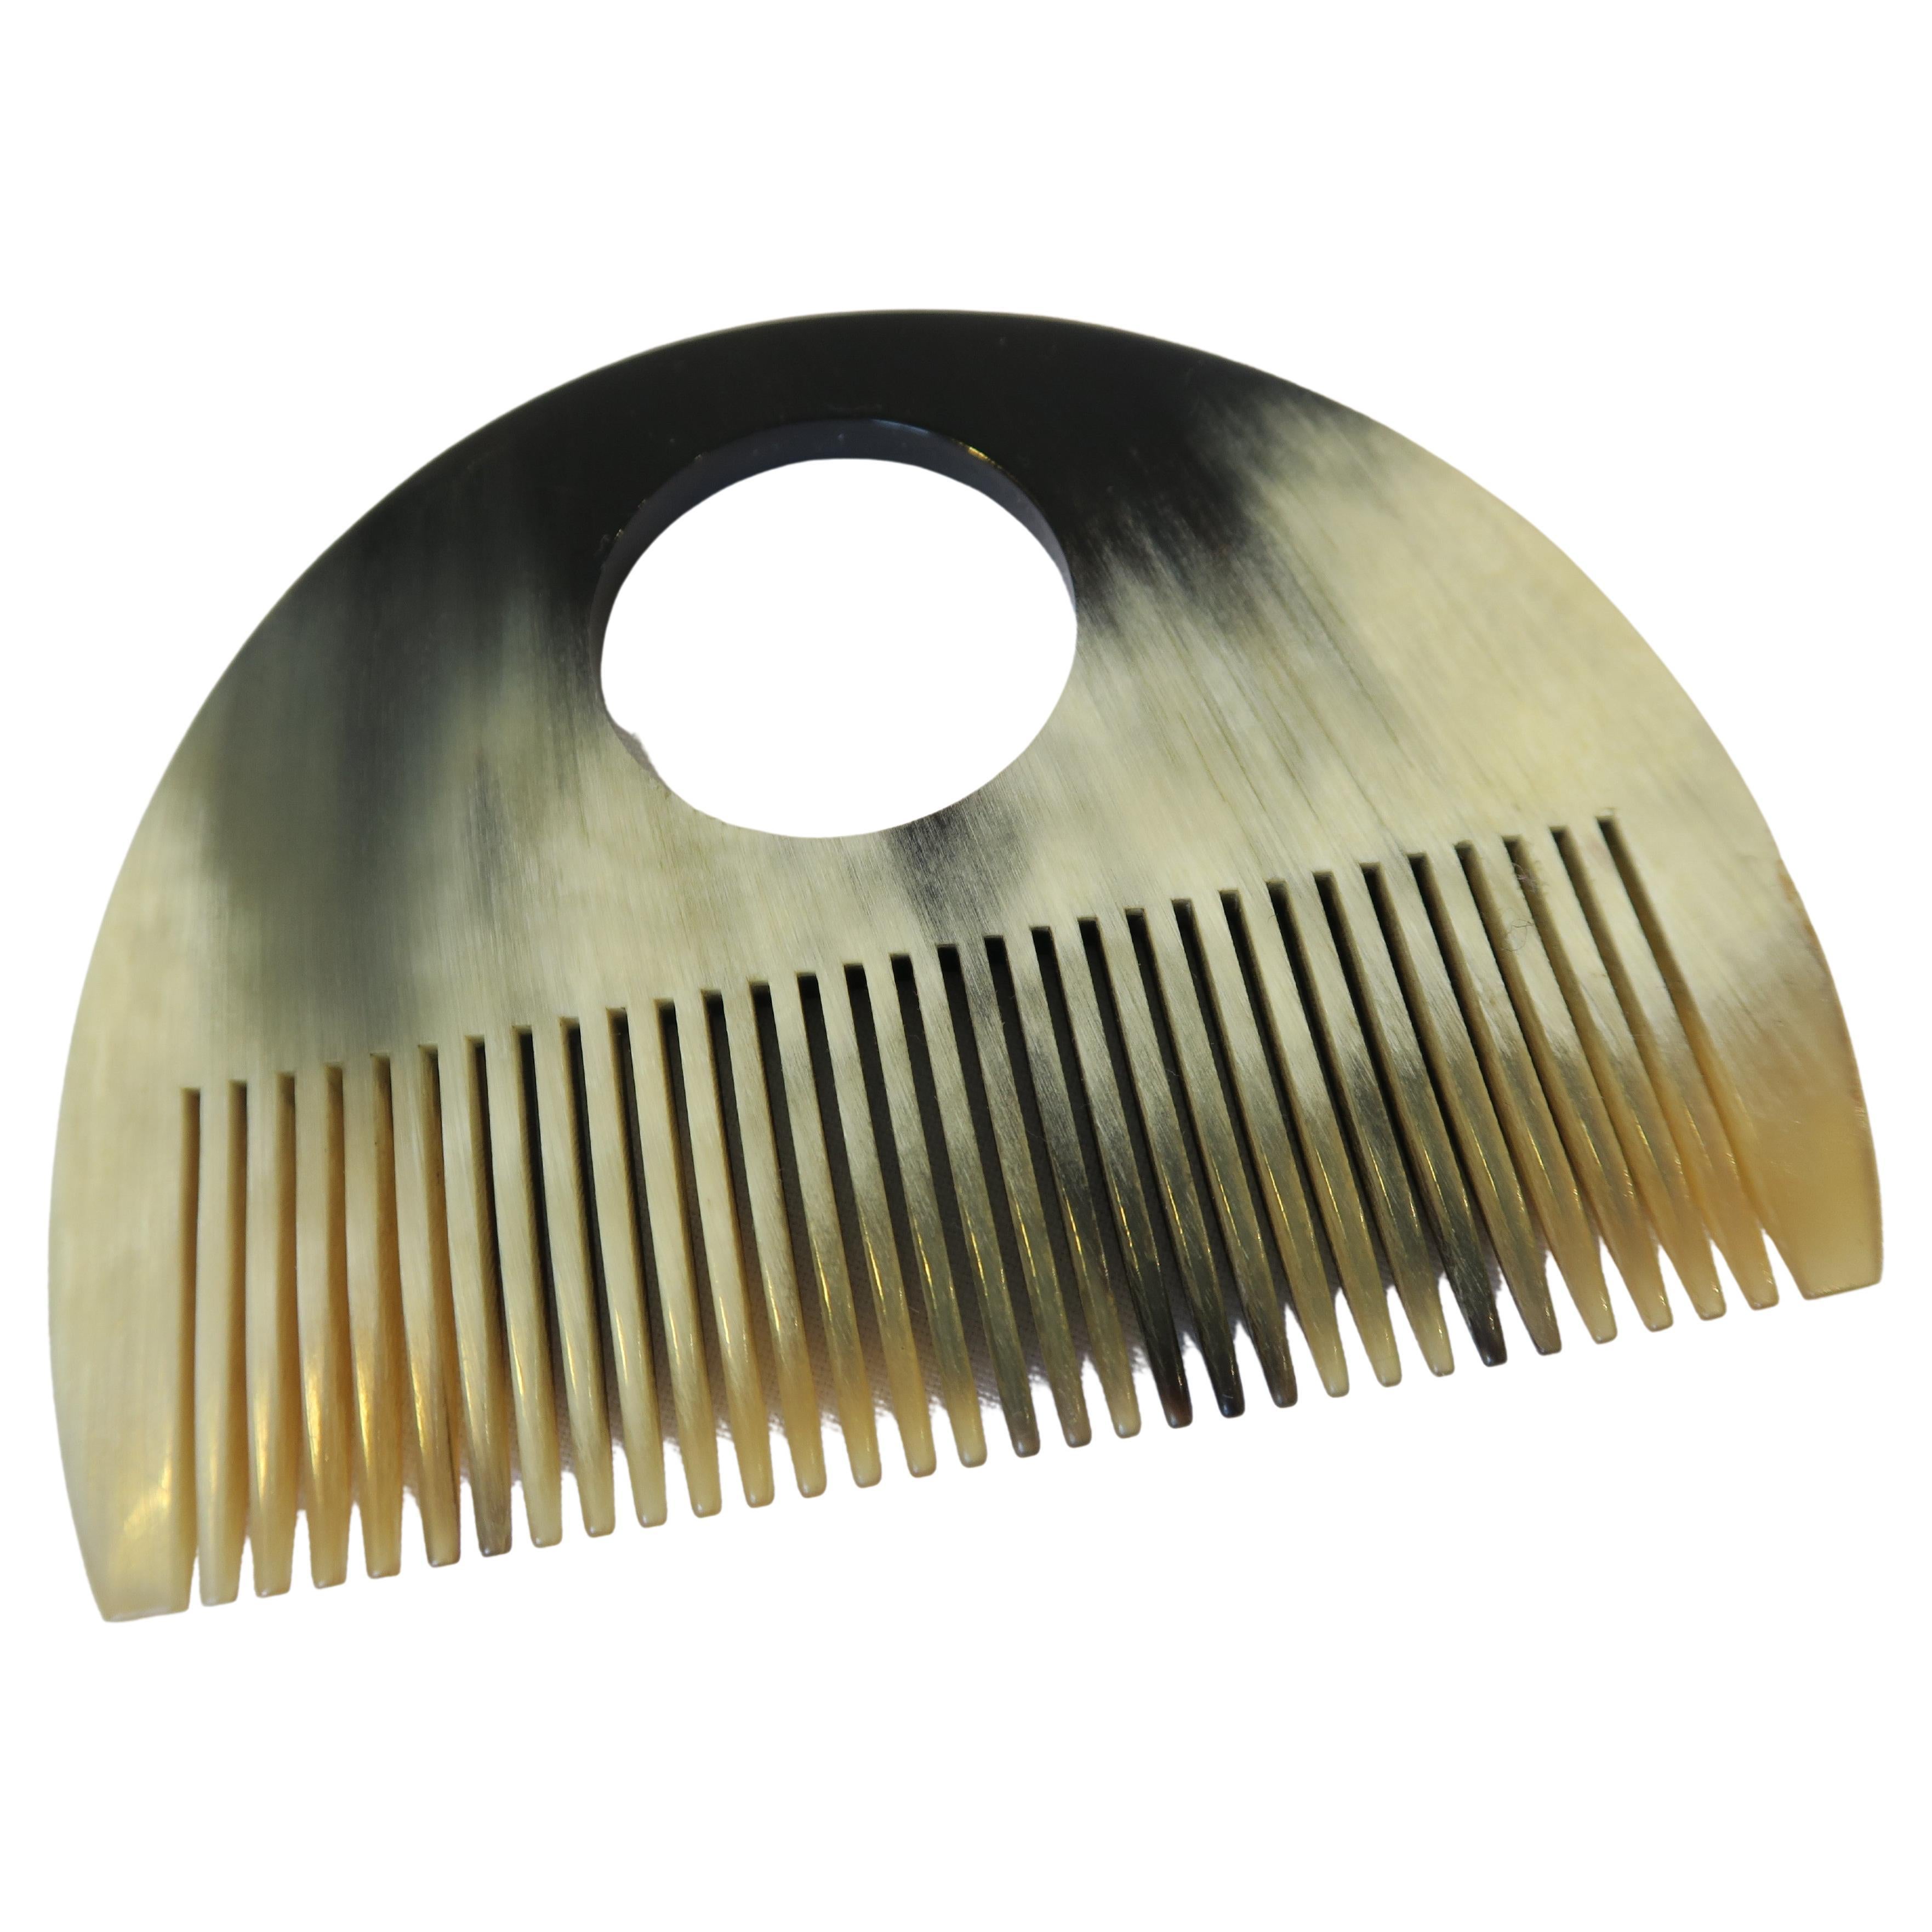 Original Midcentury Carl Auböck Comb Made from Horn For Sale